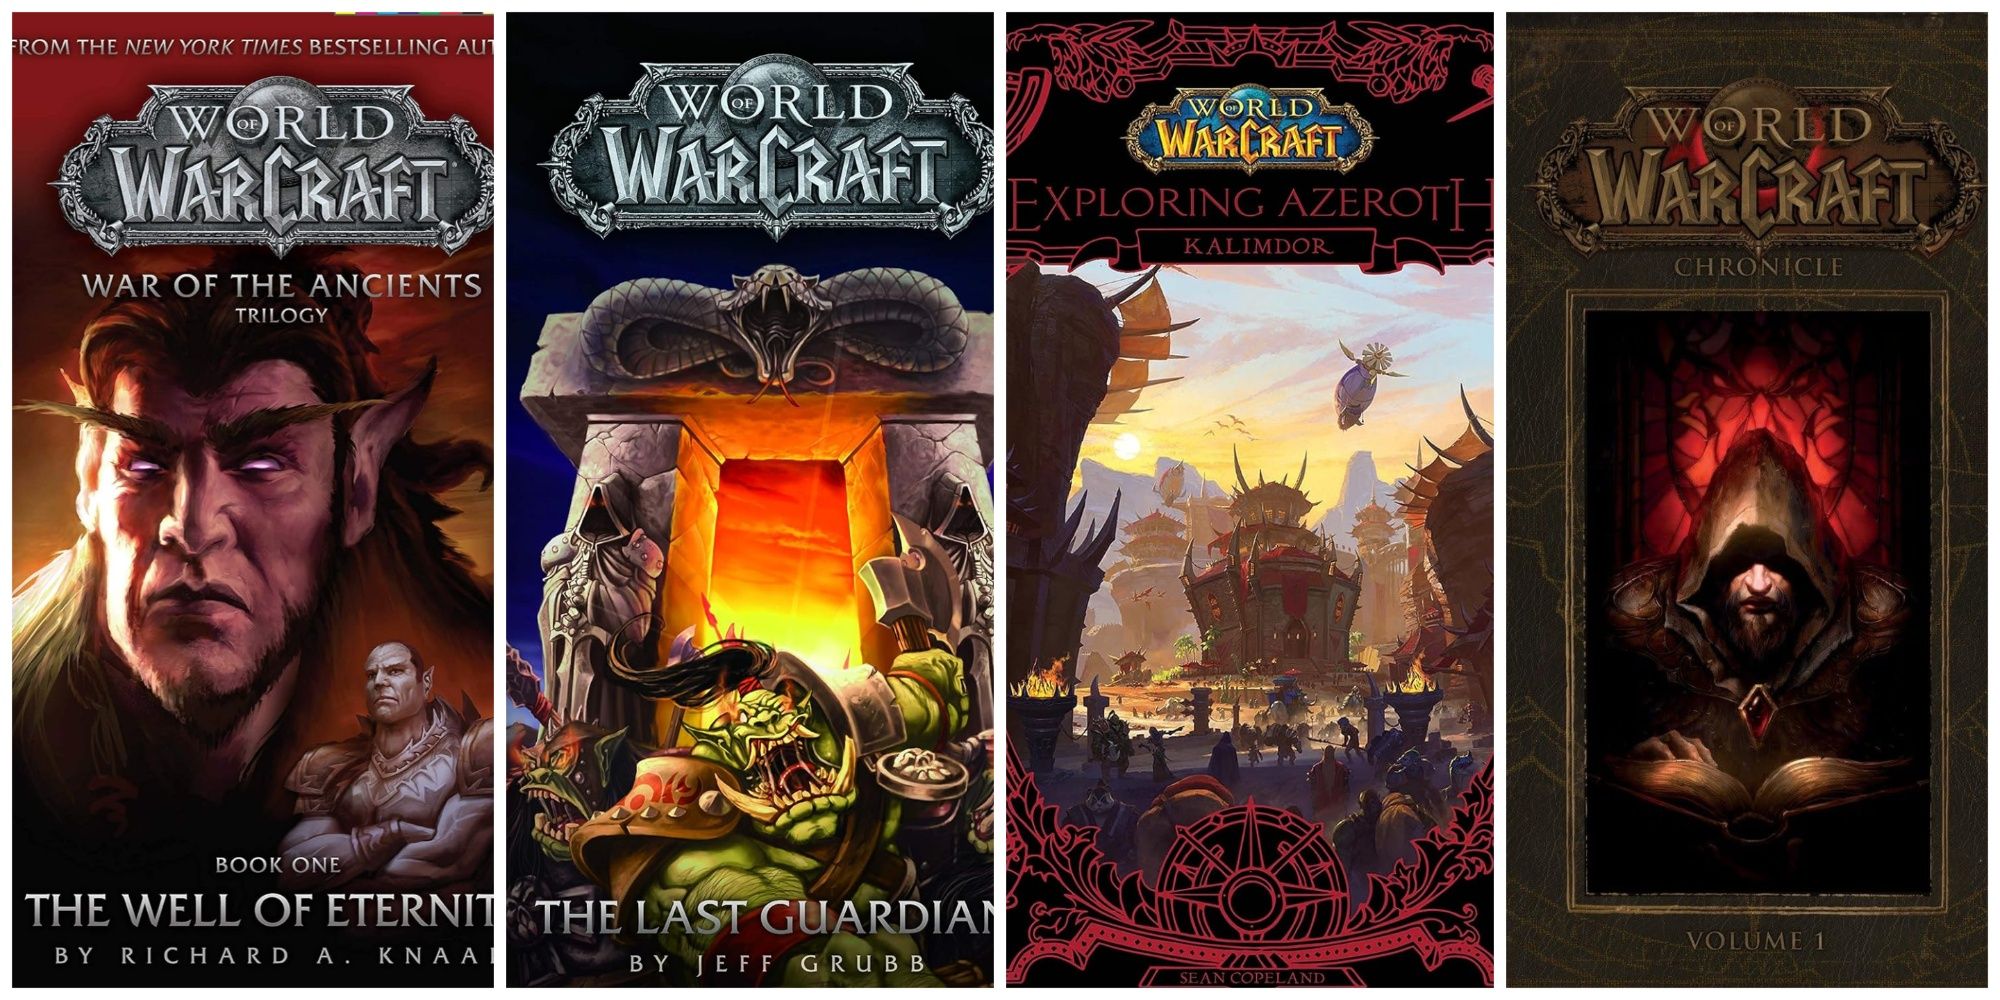 Four World of Warcraft novels: The Well of Eternity, The Last Guardian, Exploring Azeroth, and Chronicle Volume 1.